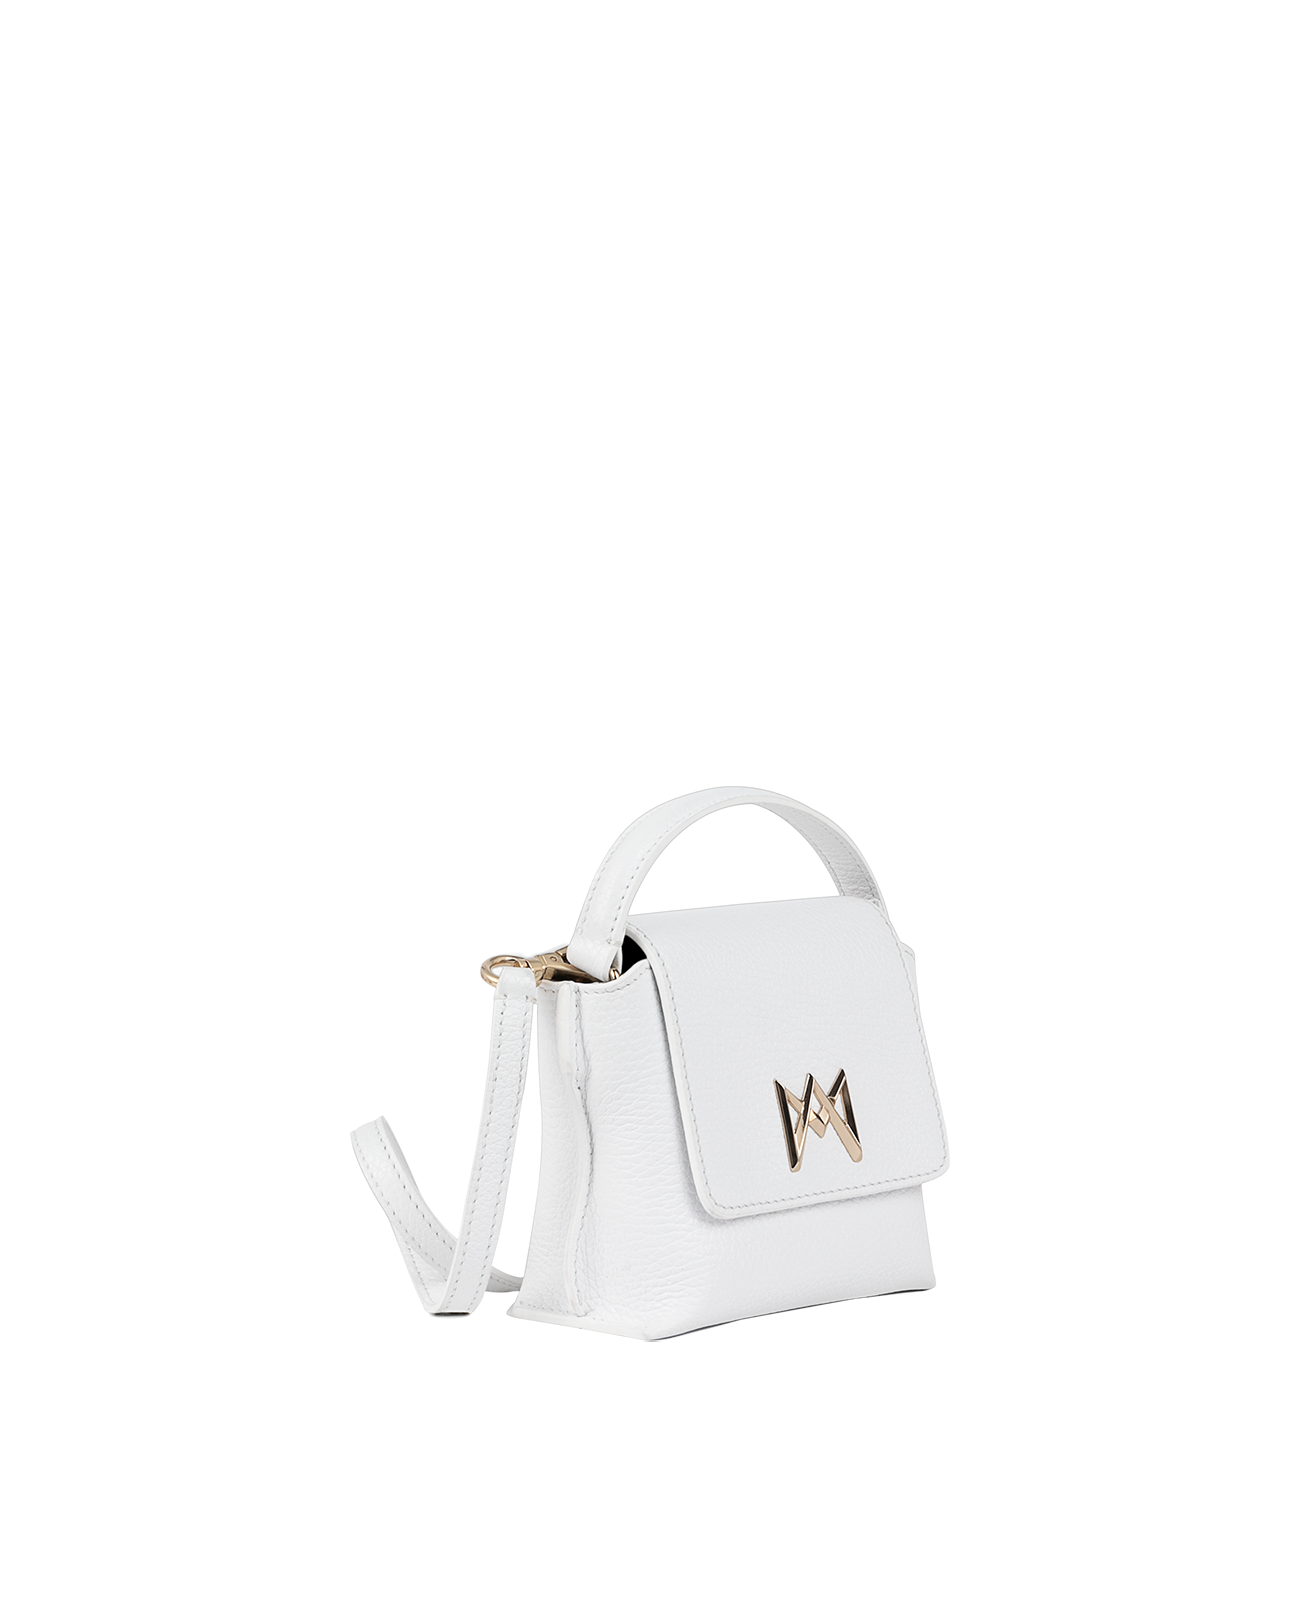 Cross-body bag in Italian full-grain leather, semi-aniline calf Italian leather with detachable shoulder strap.Three compartments, zip pocket in the back compartment. Magnetic flap closure with logo. Color: White. Size:Mini